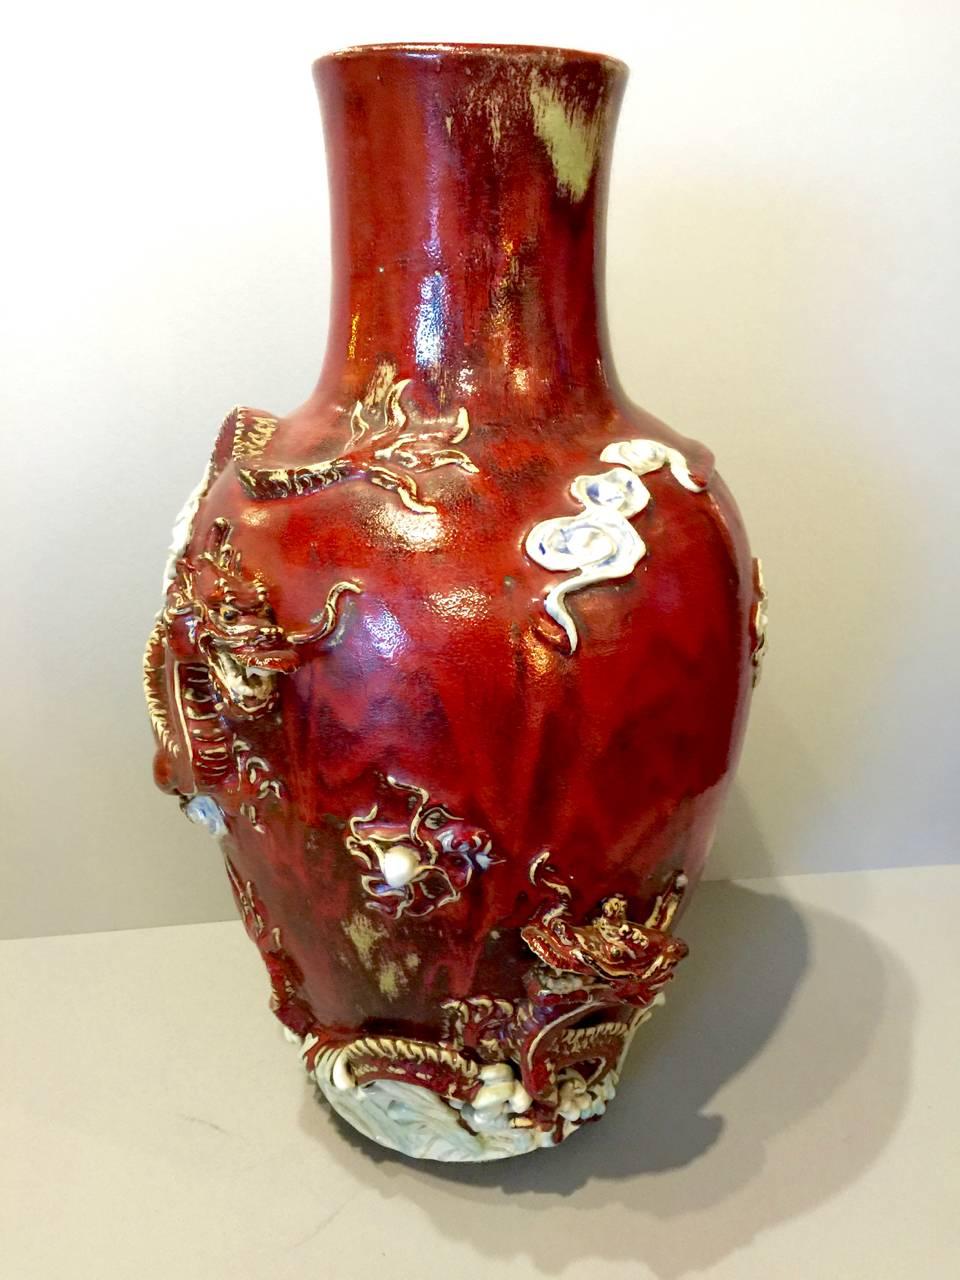 This is a stunning artist signed large Sumida vase decorated with a pair of high relief dragons, flaming pearls, waves, clouds and a poem. This a large heavily potted vase and unusual in that the high relief detailing depicts dragons with flamings